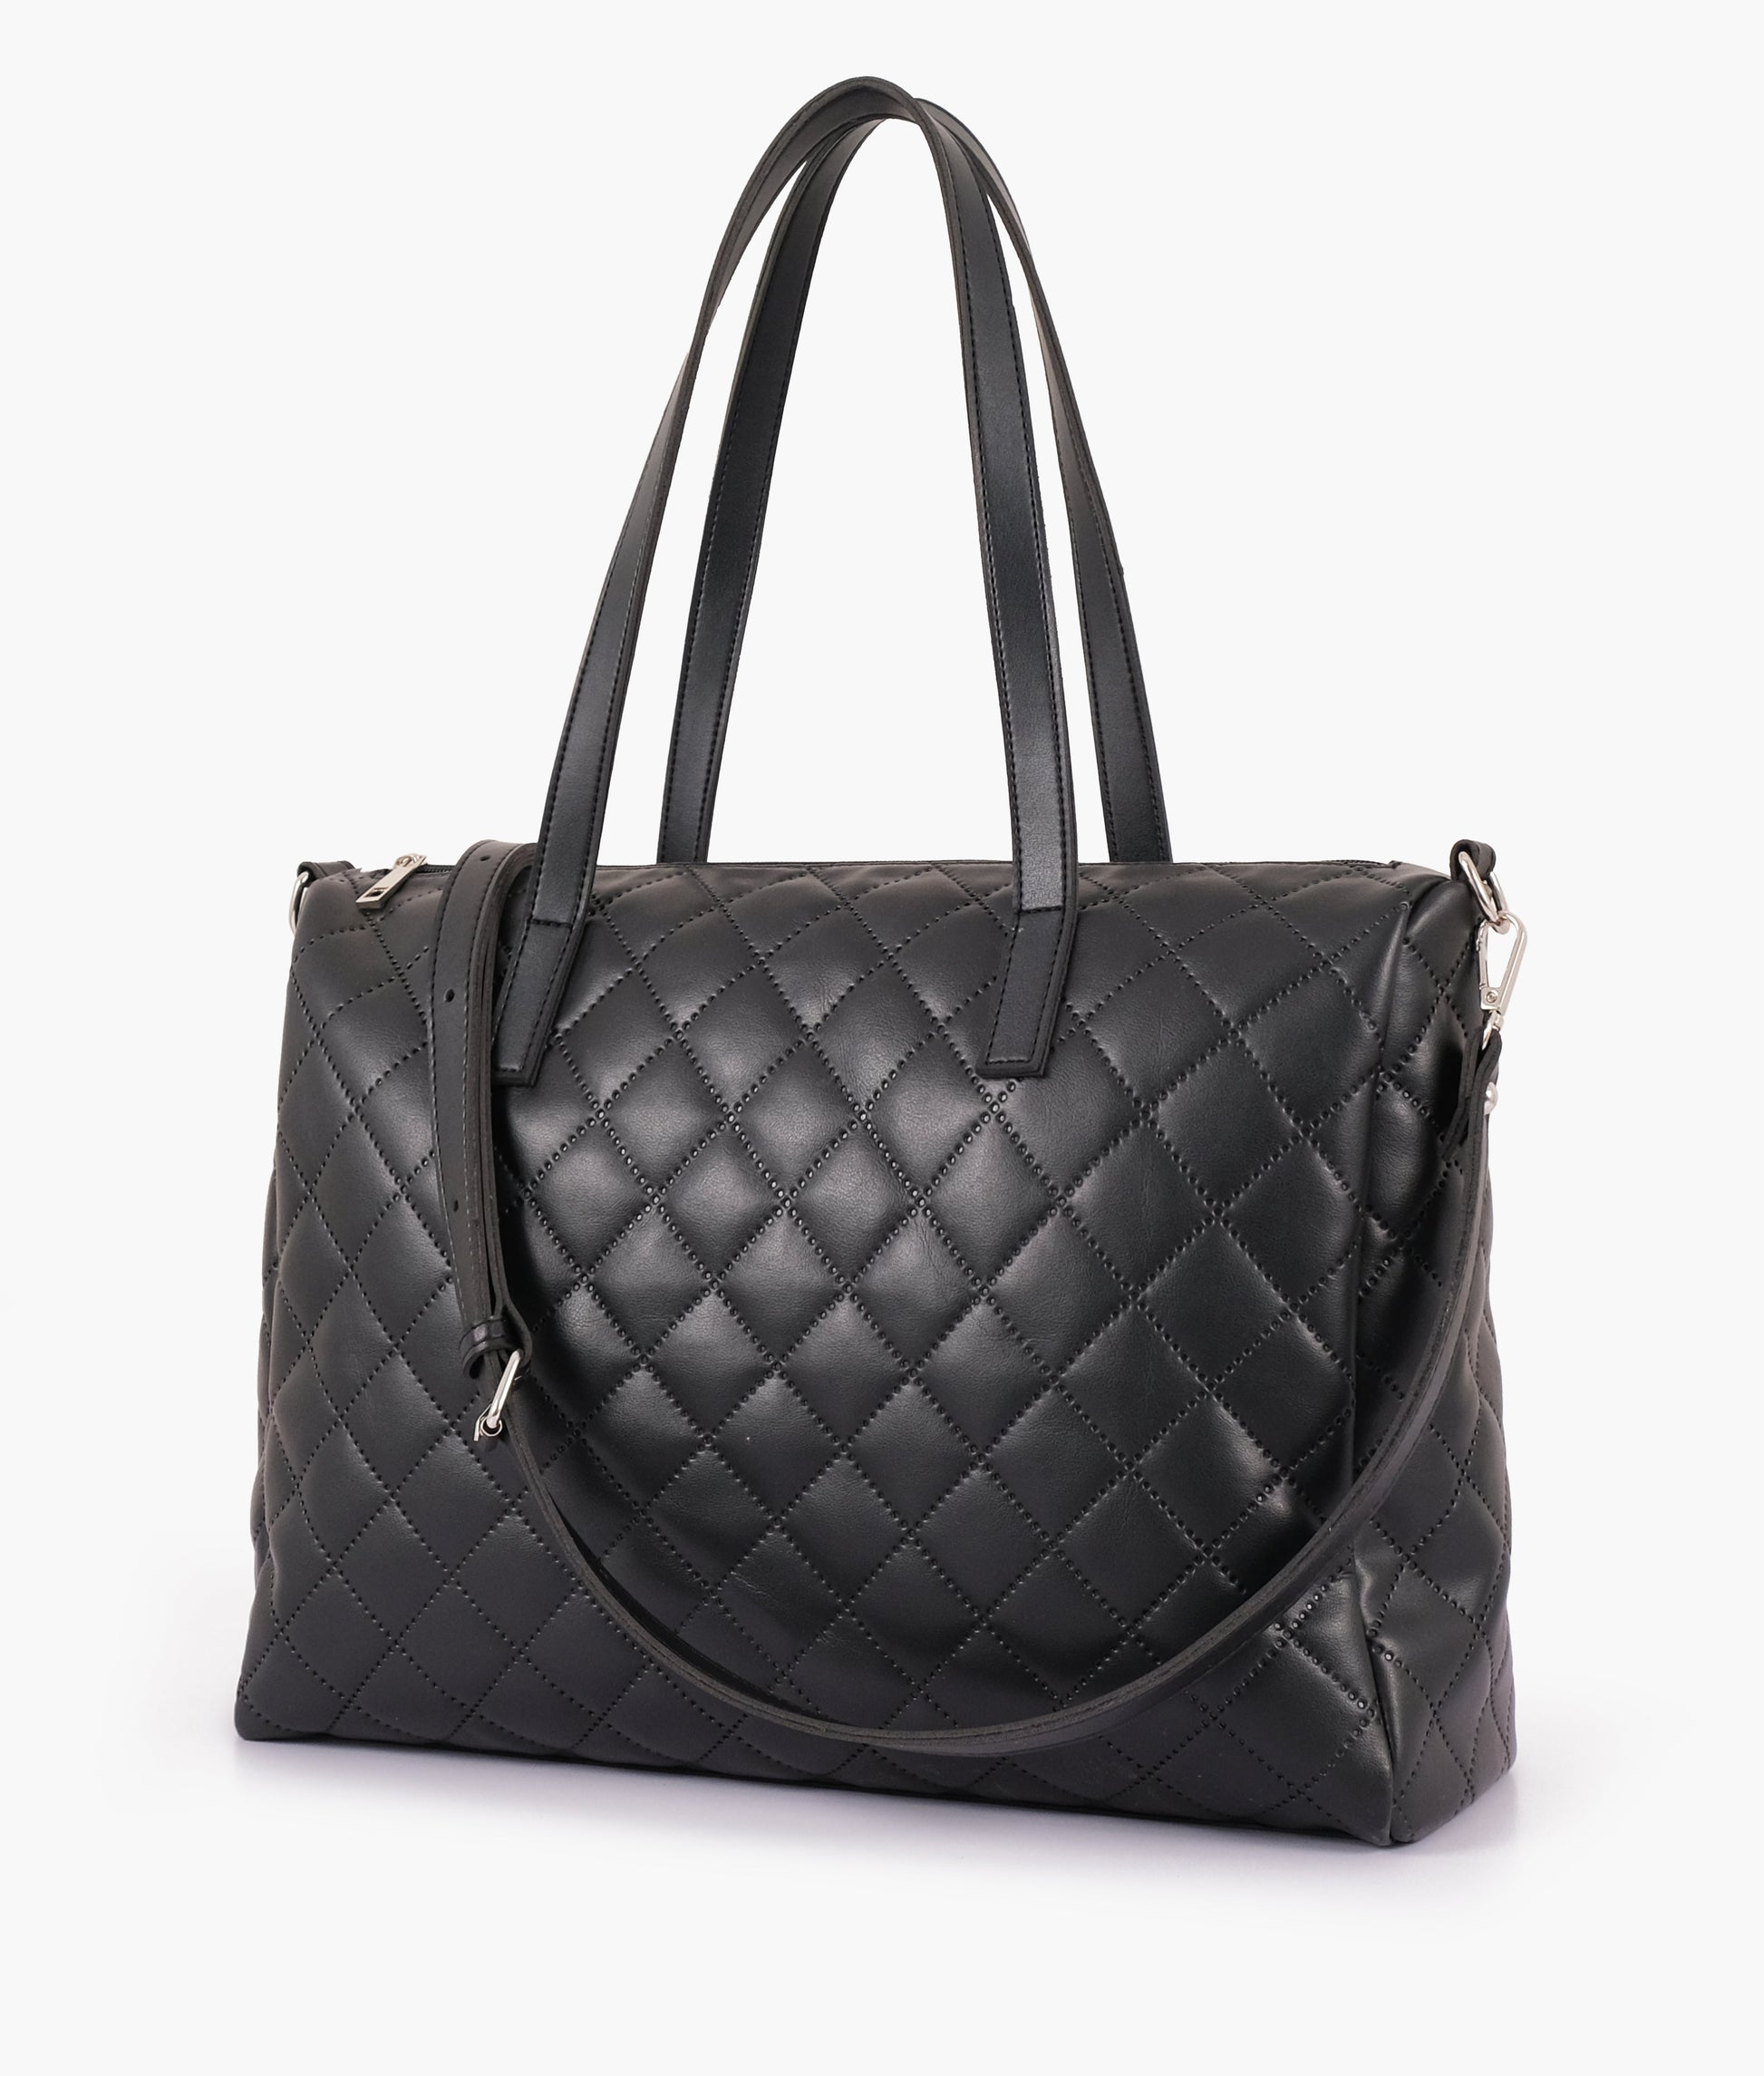 Buy Black Quilted Carryall Tote Bag in Pakistan